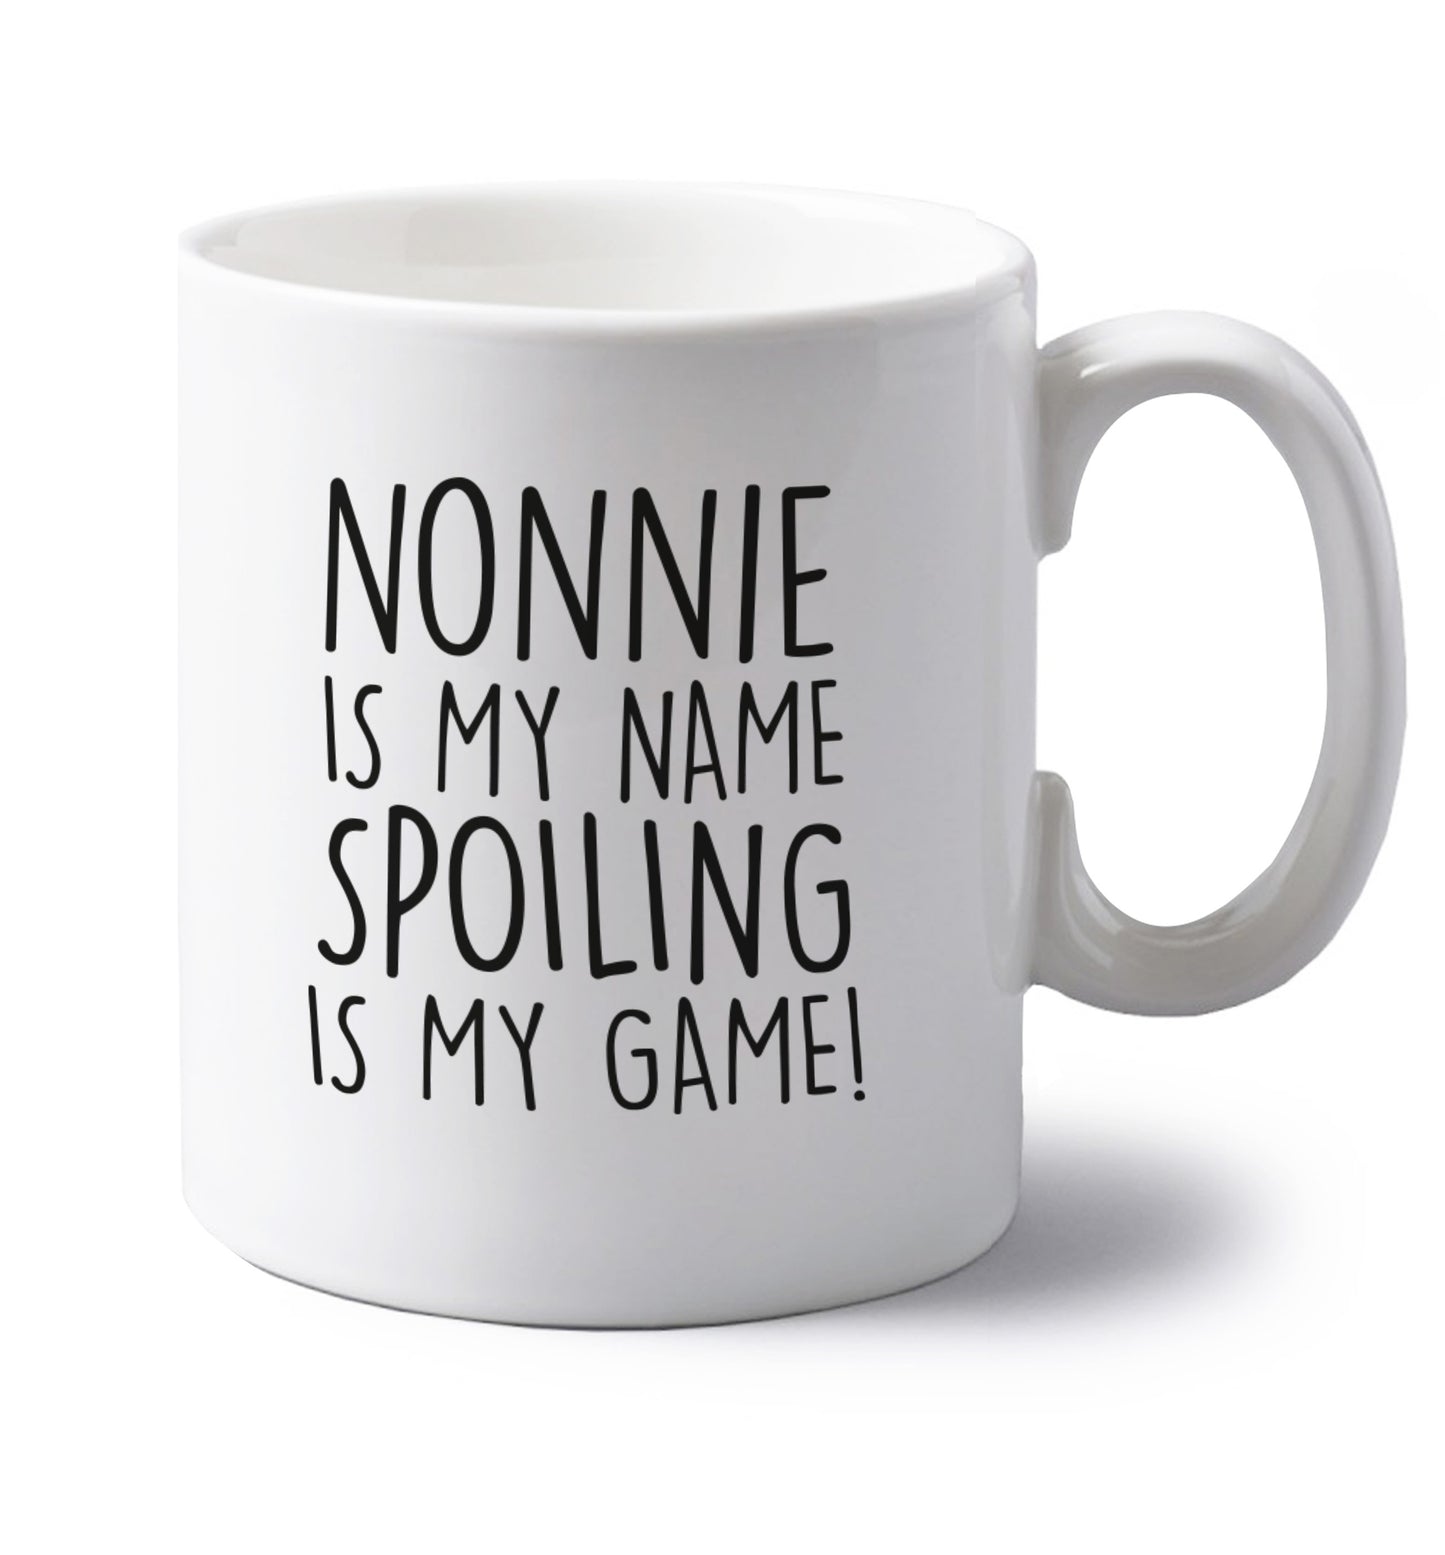 Nonnie is my name, spoiling is my game left handed white ceramic mug 